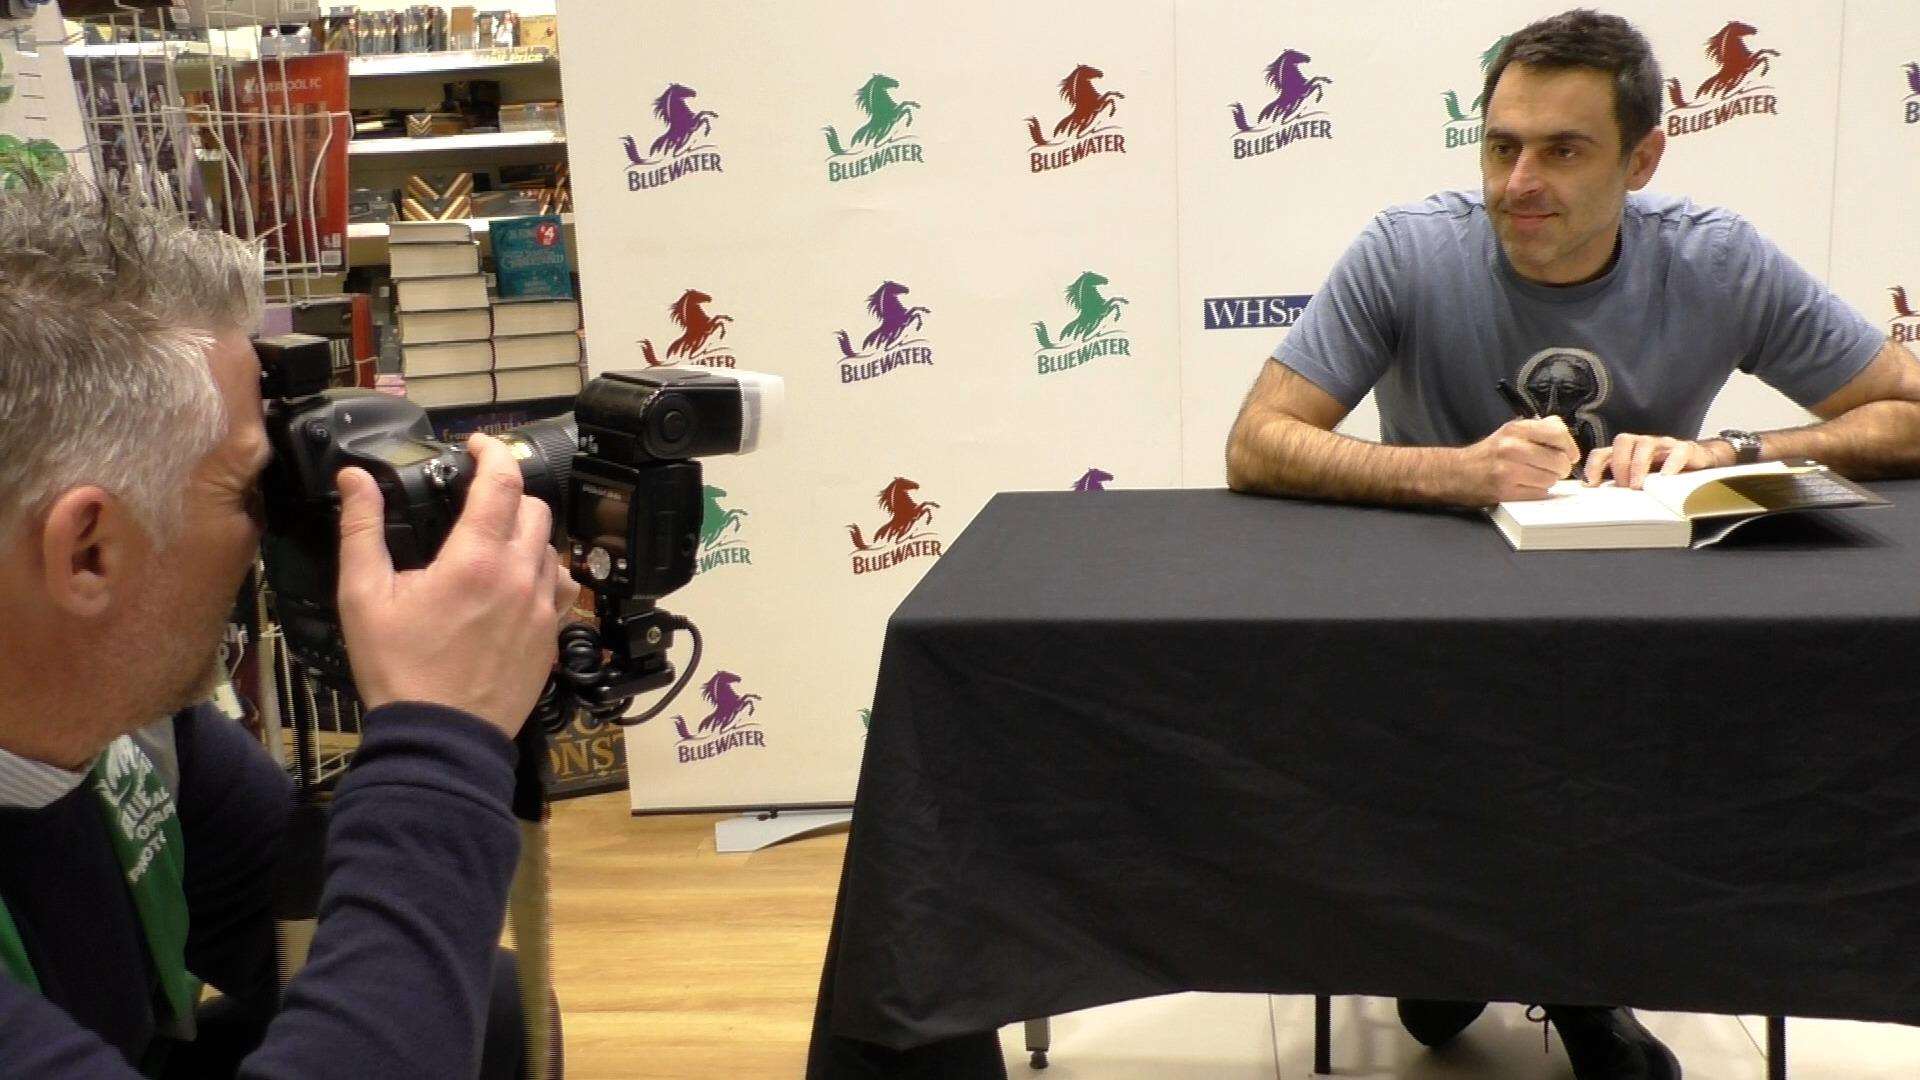 Ronnie O'Sullivan was at Bluewater meeting fans and signing his book